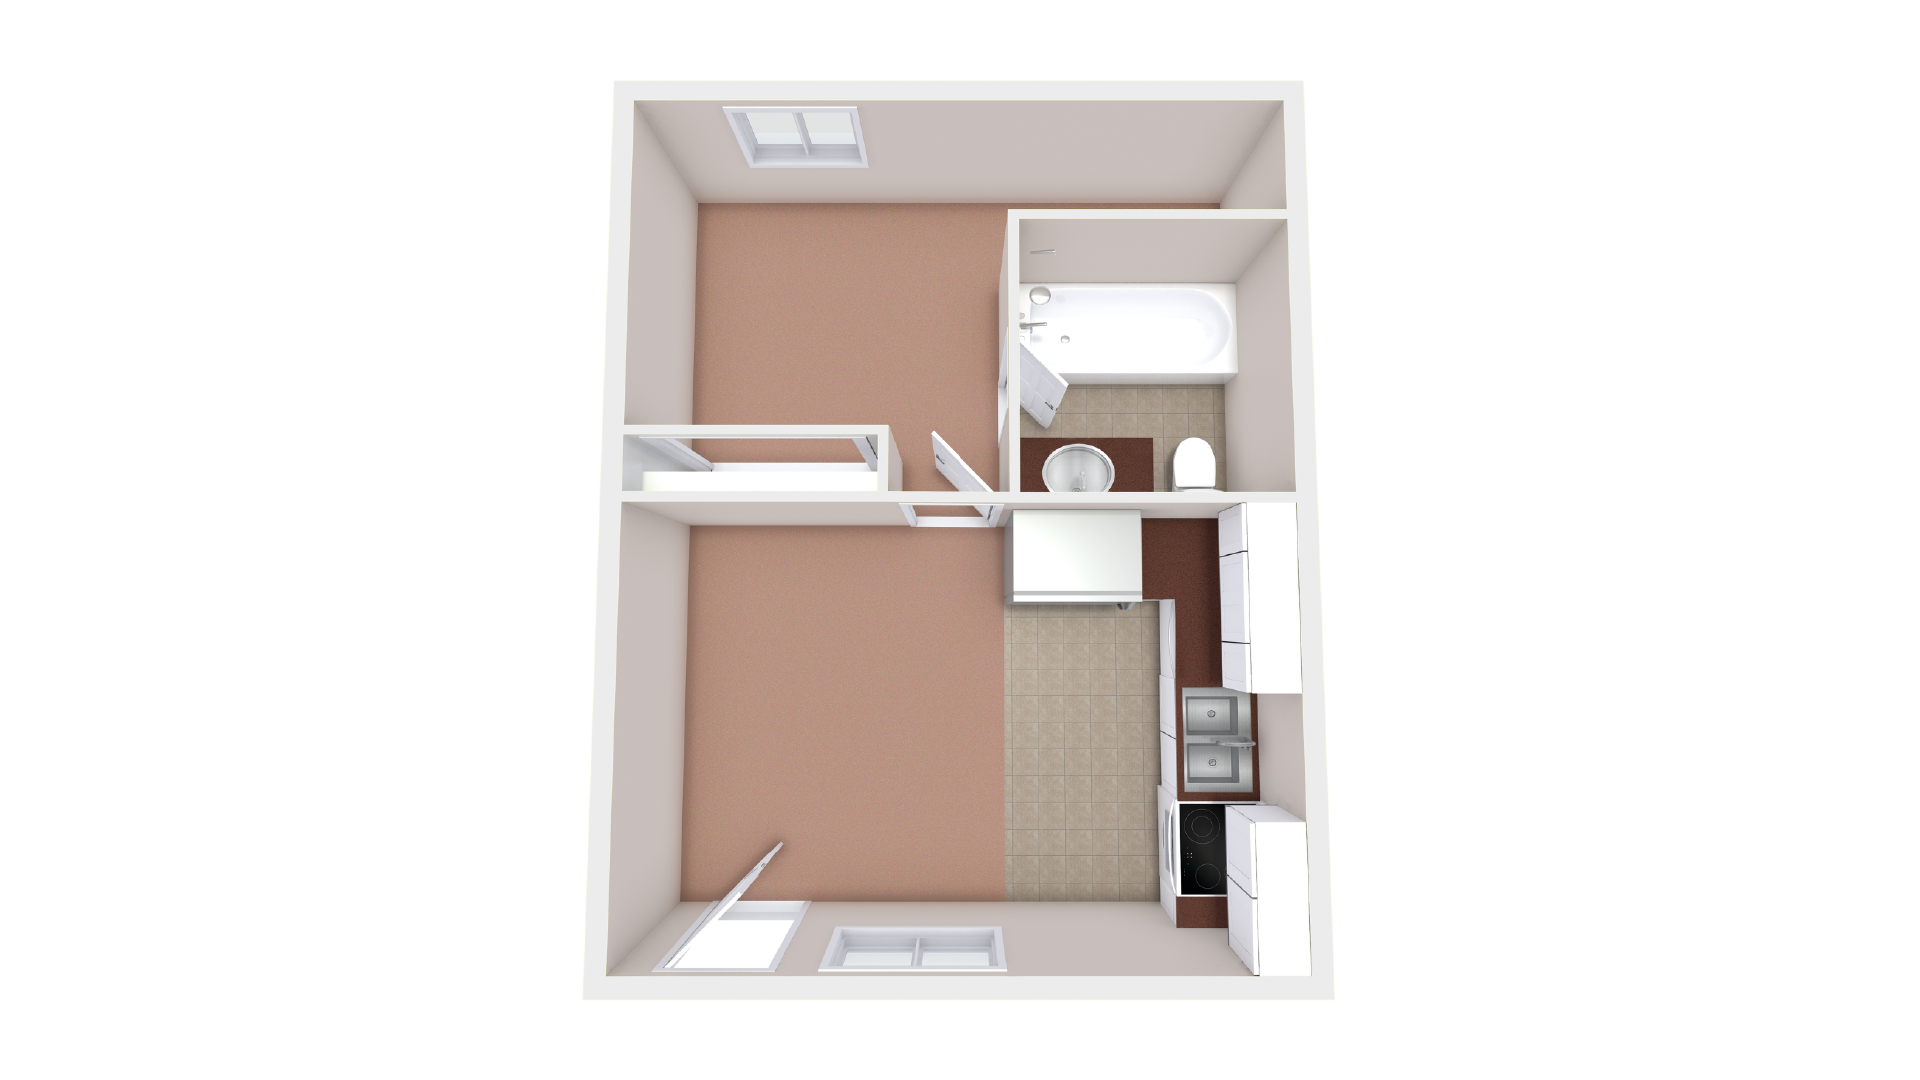 1 Bed 1 Bath Apartment Layout